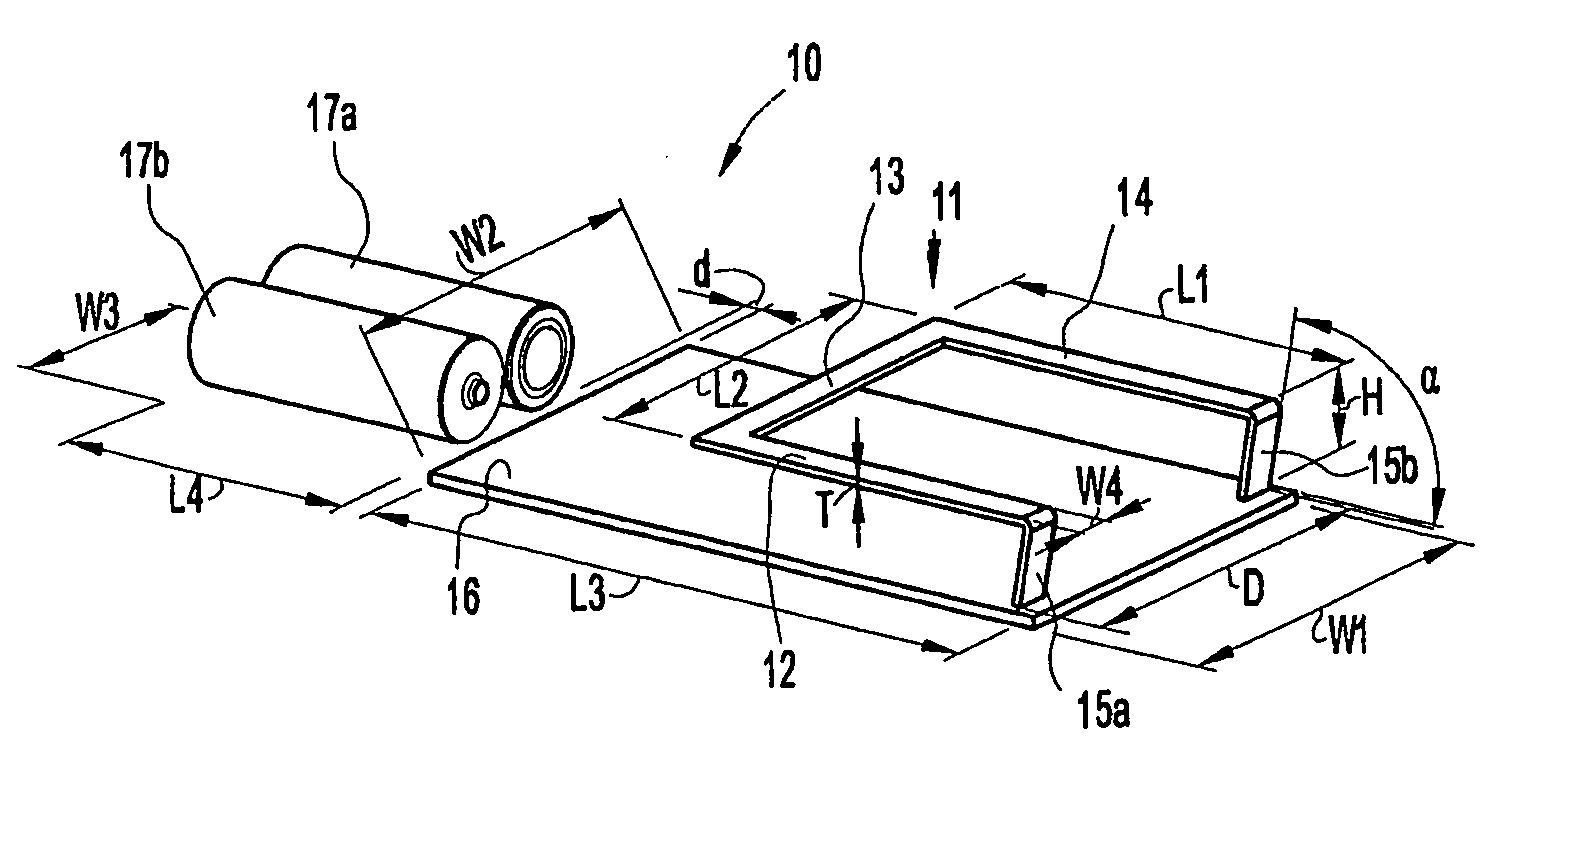 Wideband antena device with extended ground plane in a portable device